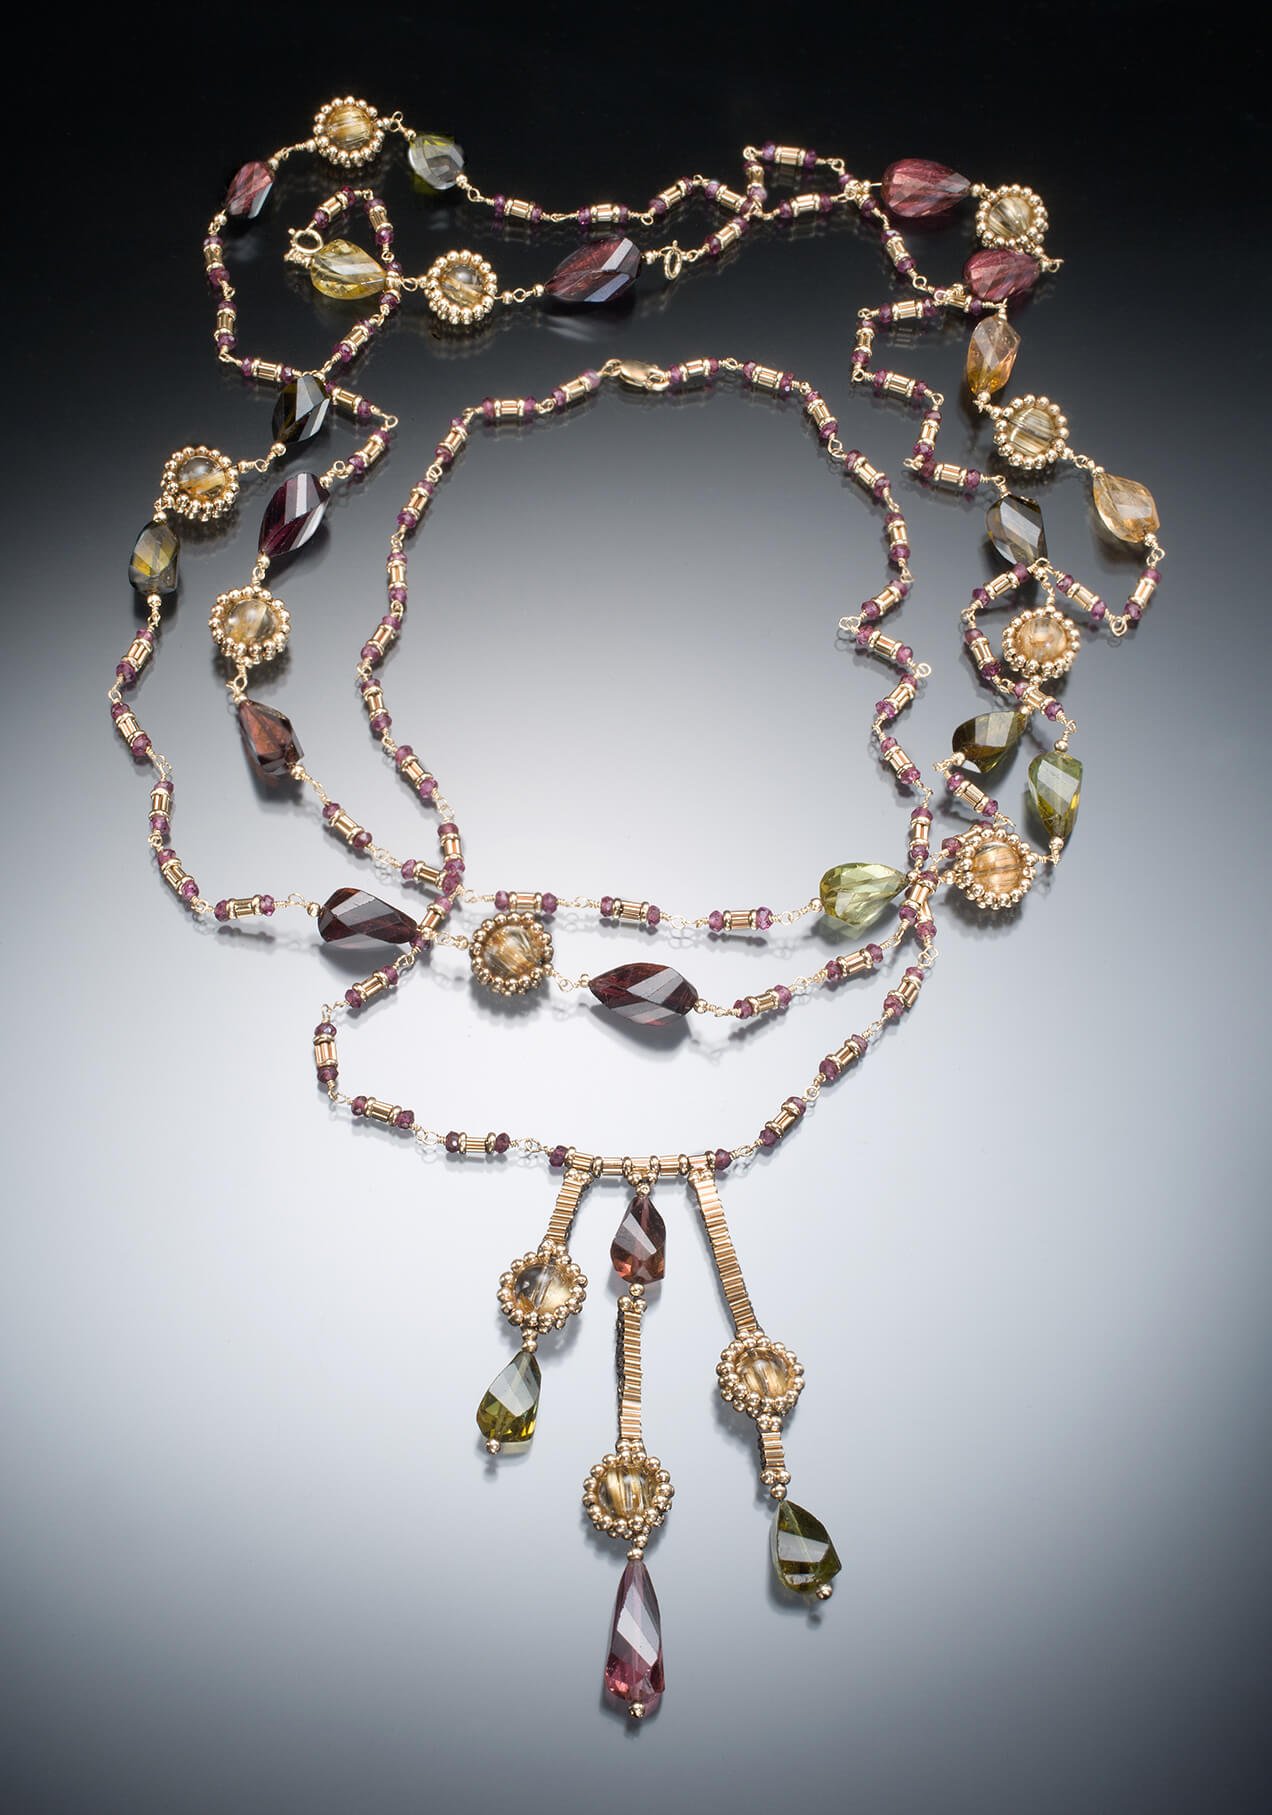 Double Tourmaline Necklaces. These two stacked necklaces are hand woven and wire wrapped of multicolor, fancy-cut, tourmaline beads, and 14k gold.